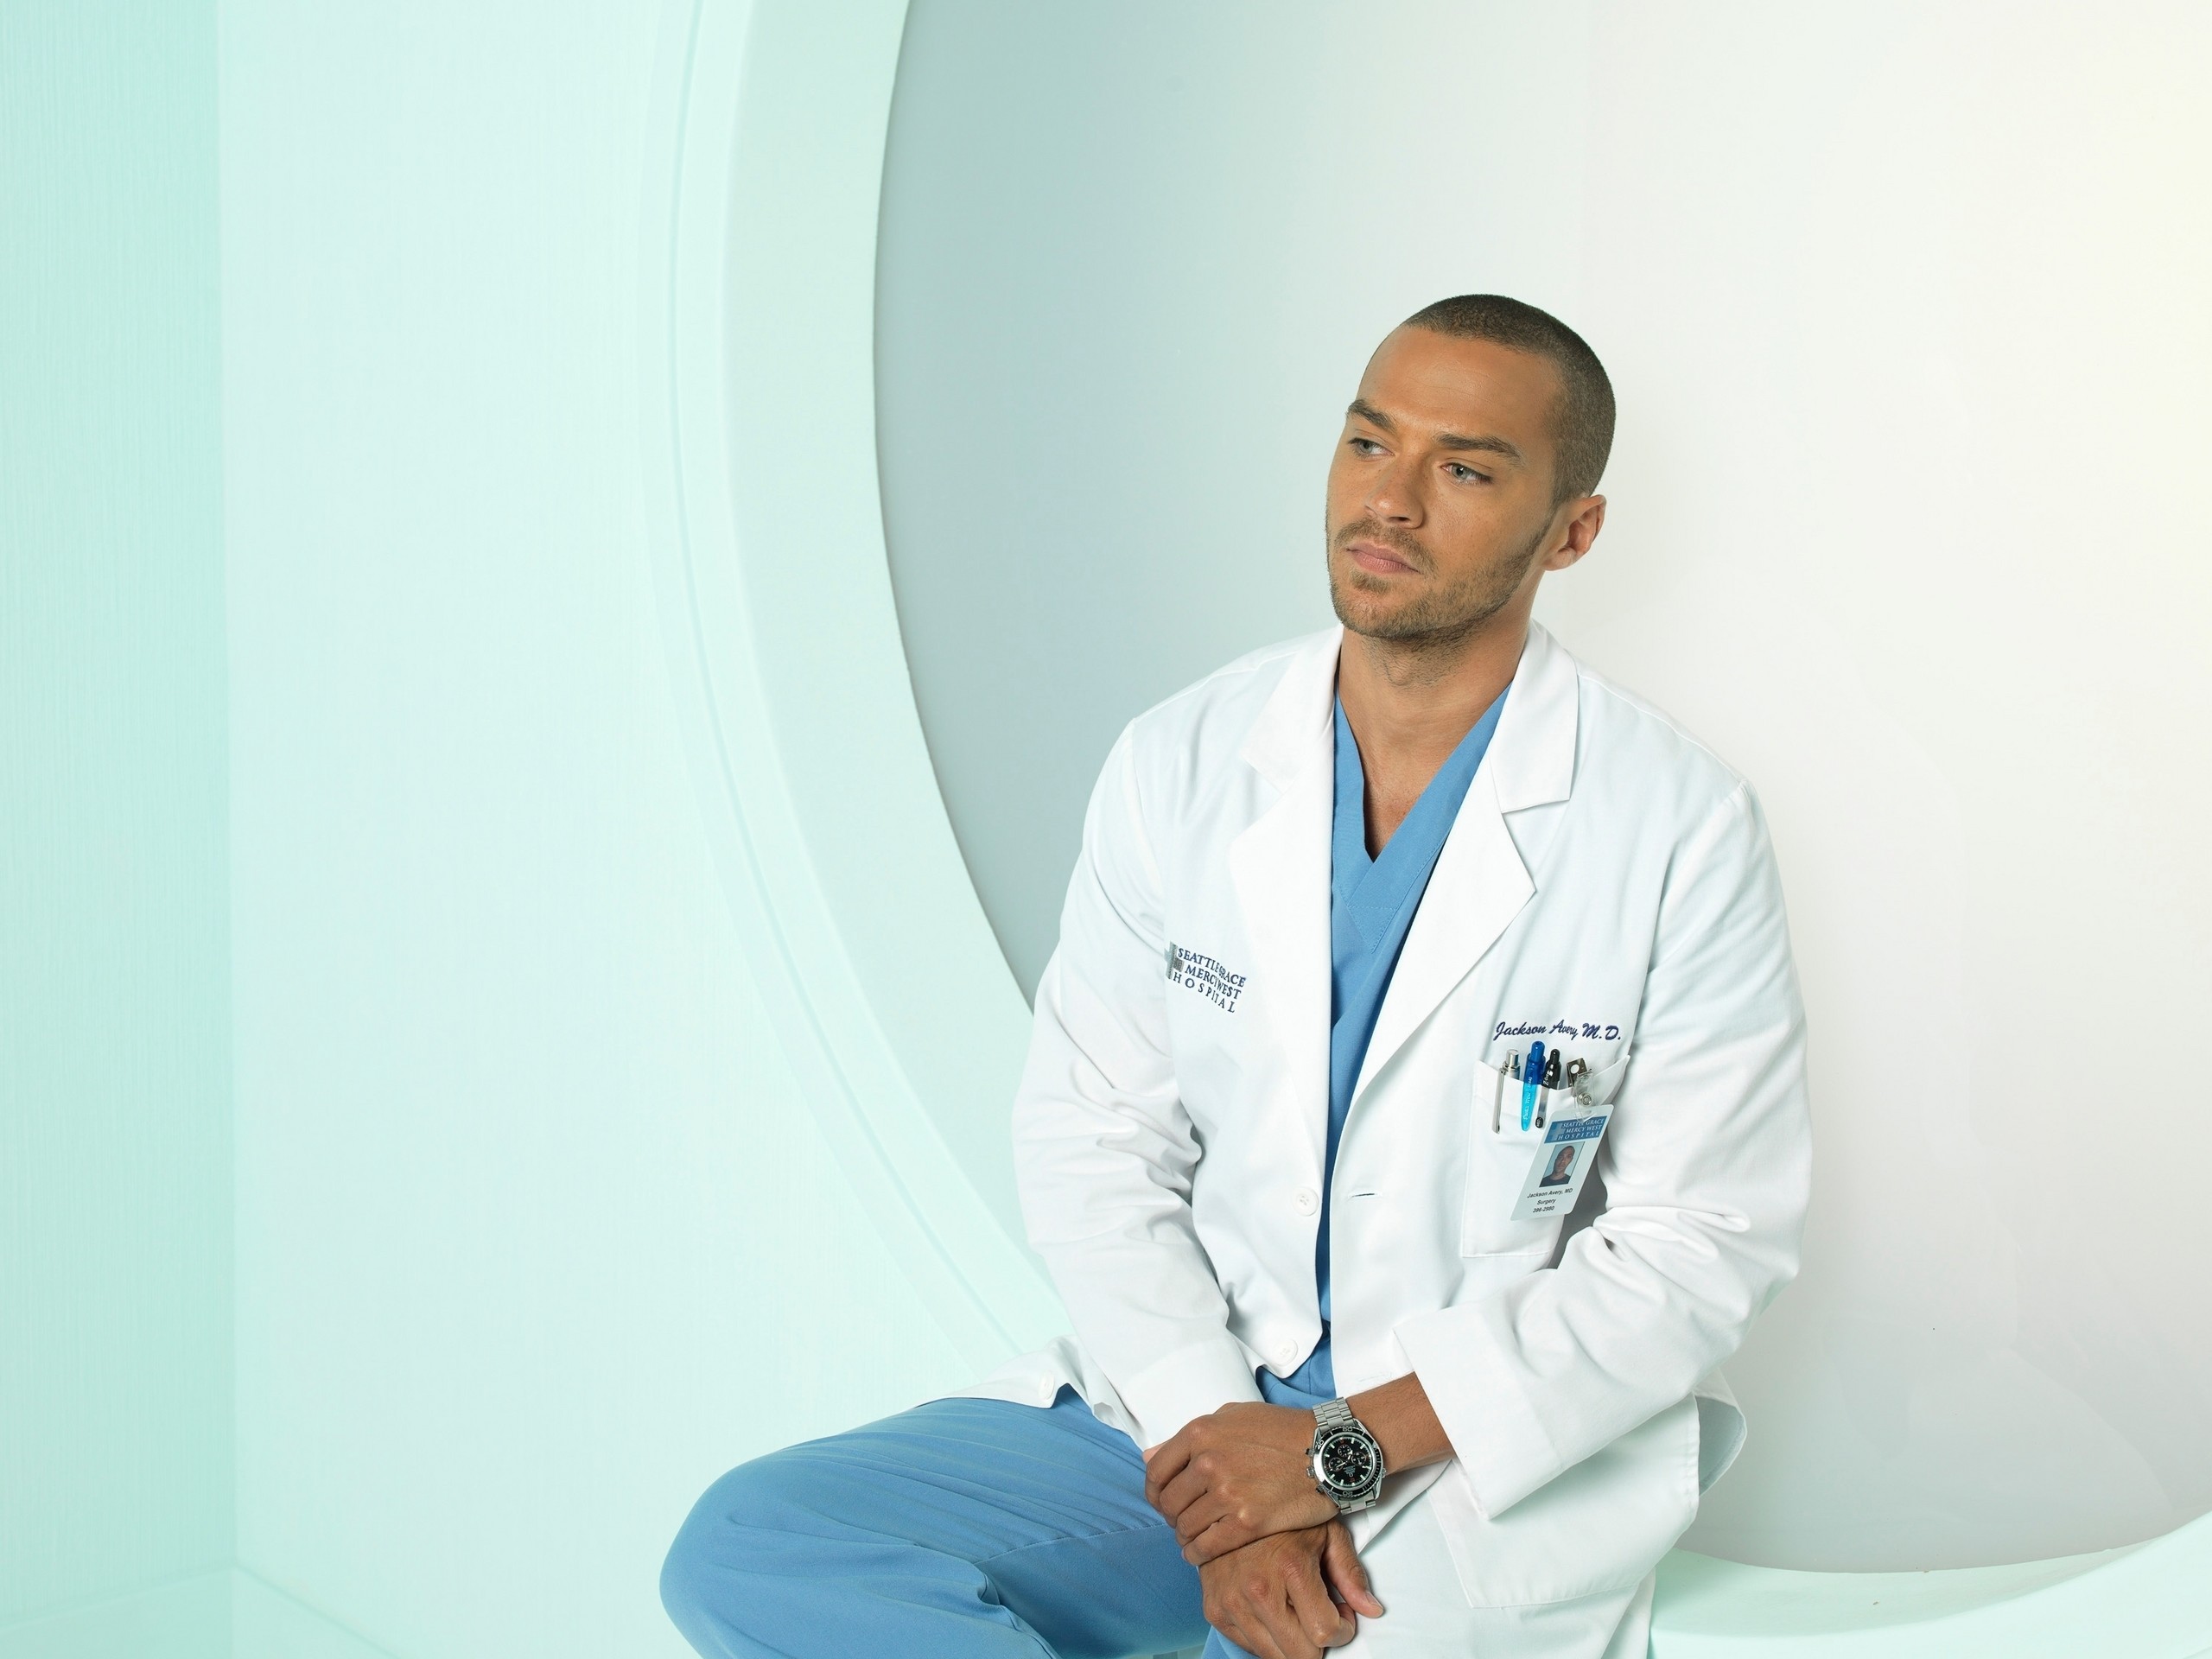 2560x1920 HD Wallpaper and background photos of Season Cast Promo photos for fans of Grey's  Anatomy images.